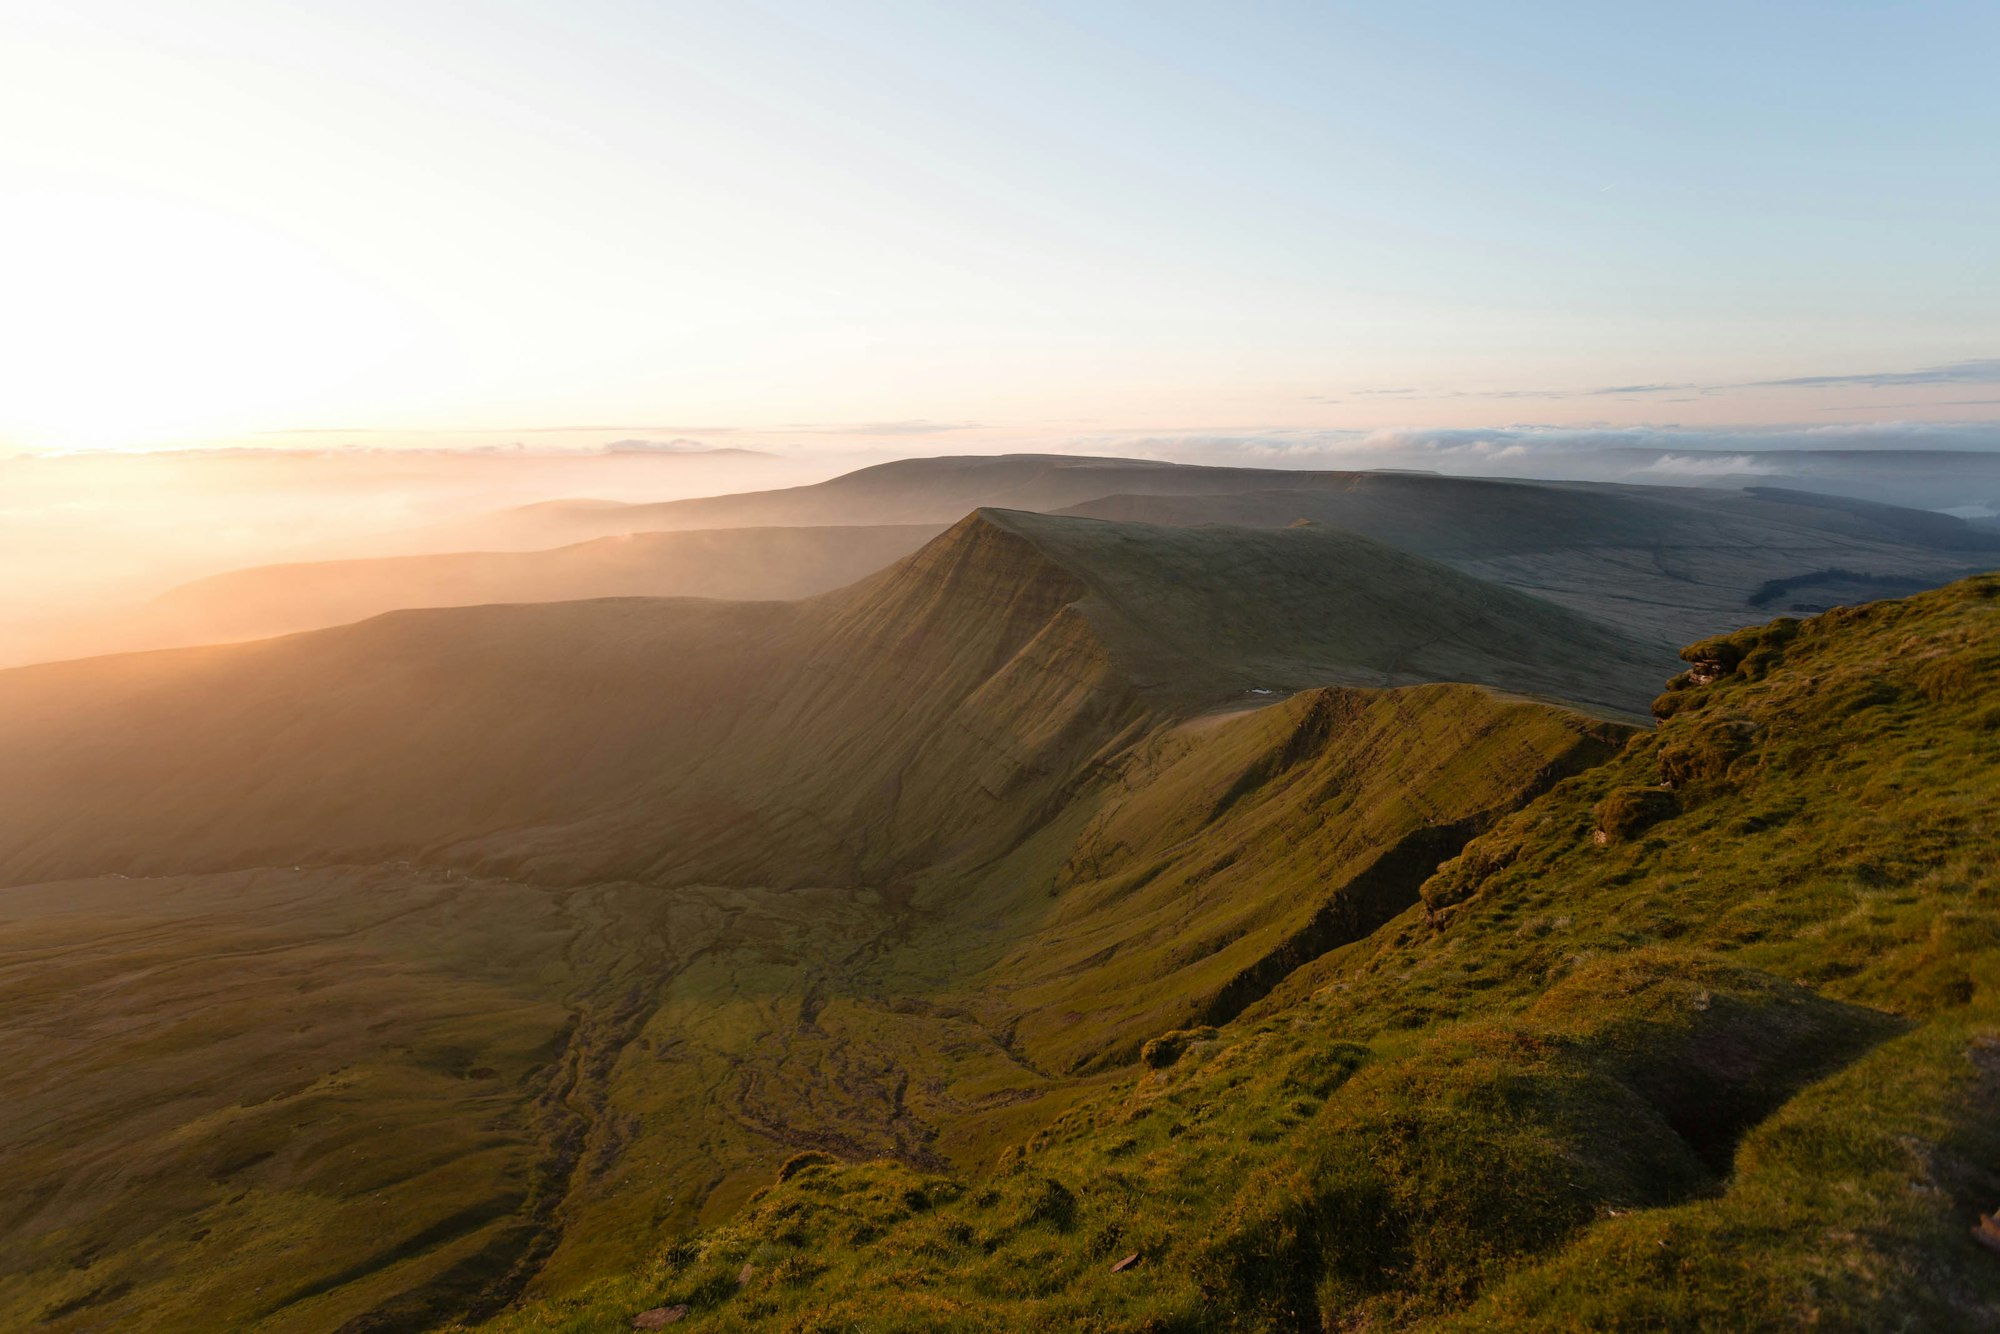 After a 3am wake up call to boil the kettle and a 4am set off on the trial, we go to the summit of Pen Y Fan just in time for the sunrise that day. And what a sunrise it was!